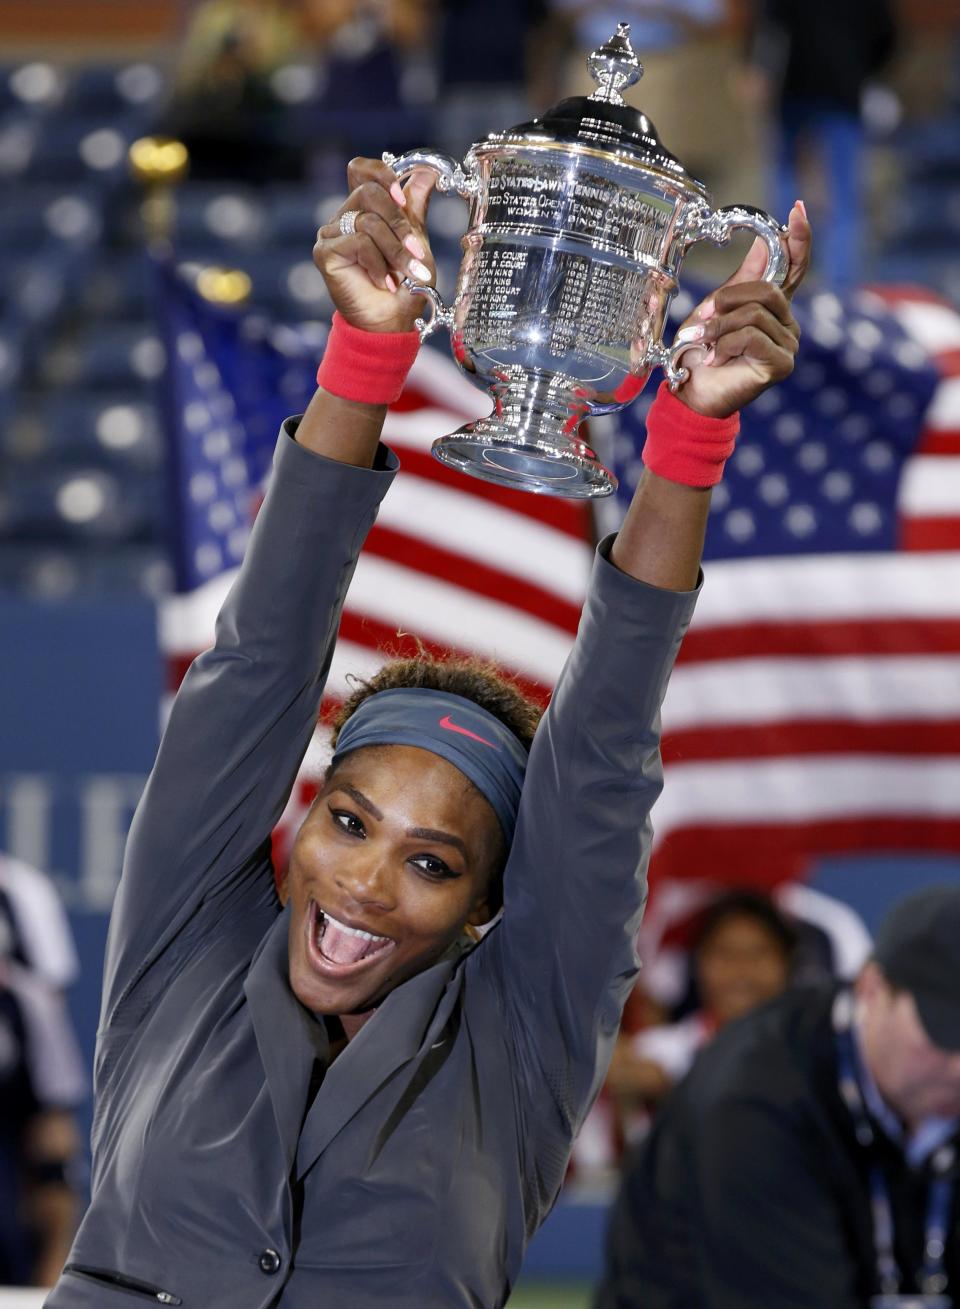 Serena Williams of the U.S. raises her trophy after defeating Azarenka of Belarus in their women's singles final match at the U.S. Open tennis championships in New York